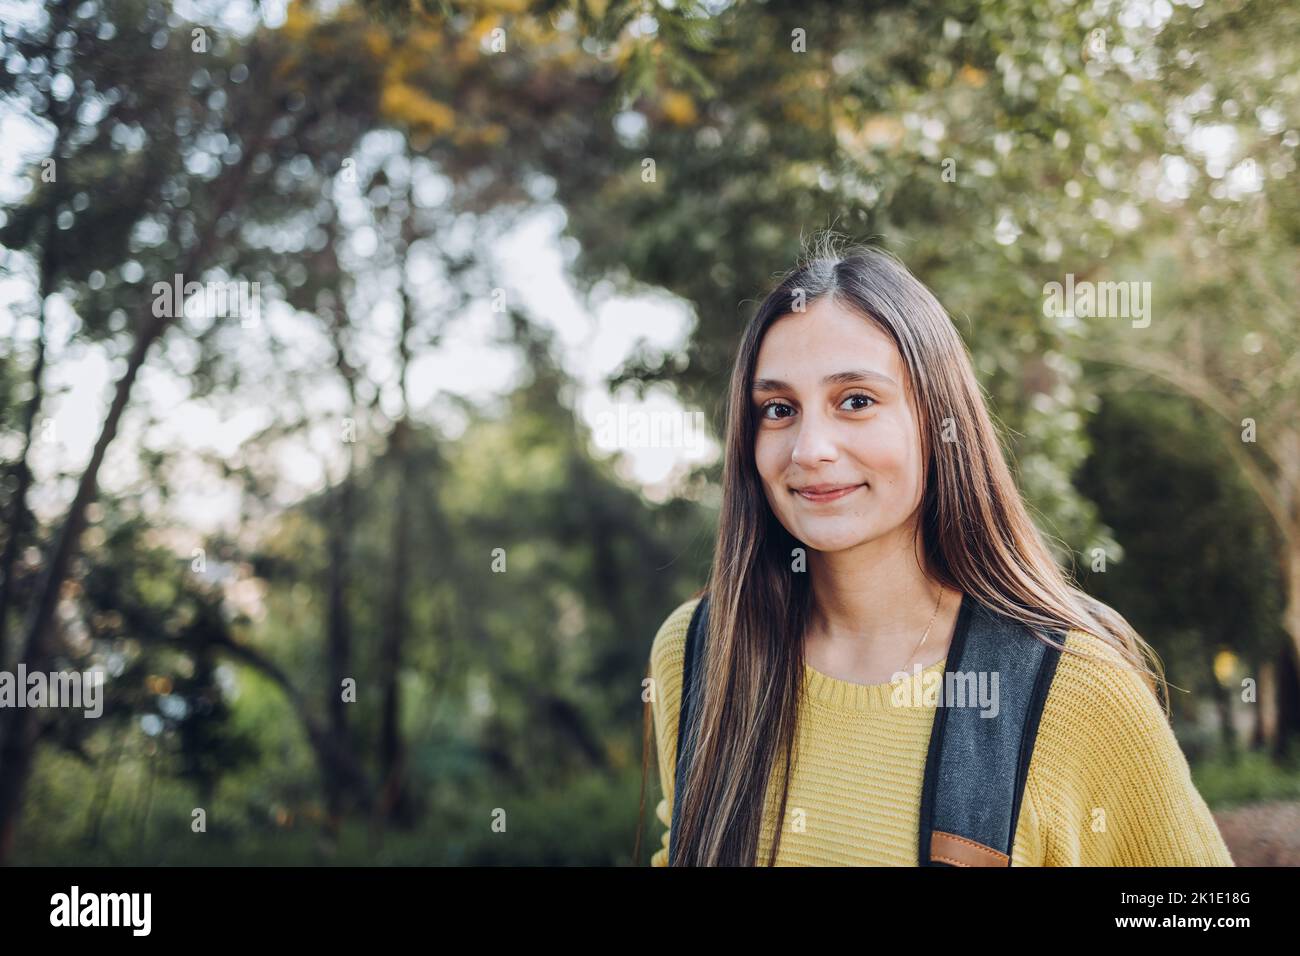 Smiling female university student wearing a yellow sweater and a backpack in the campus park road. Innocent smile Stock Photo